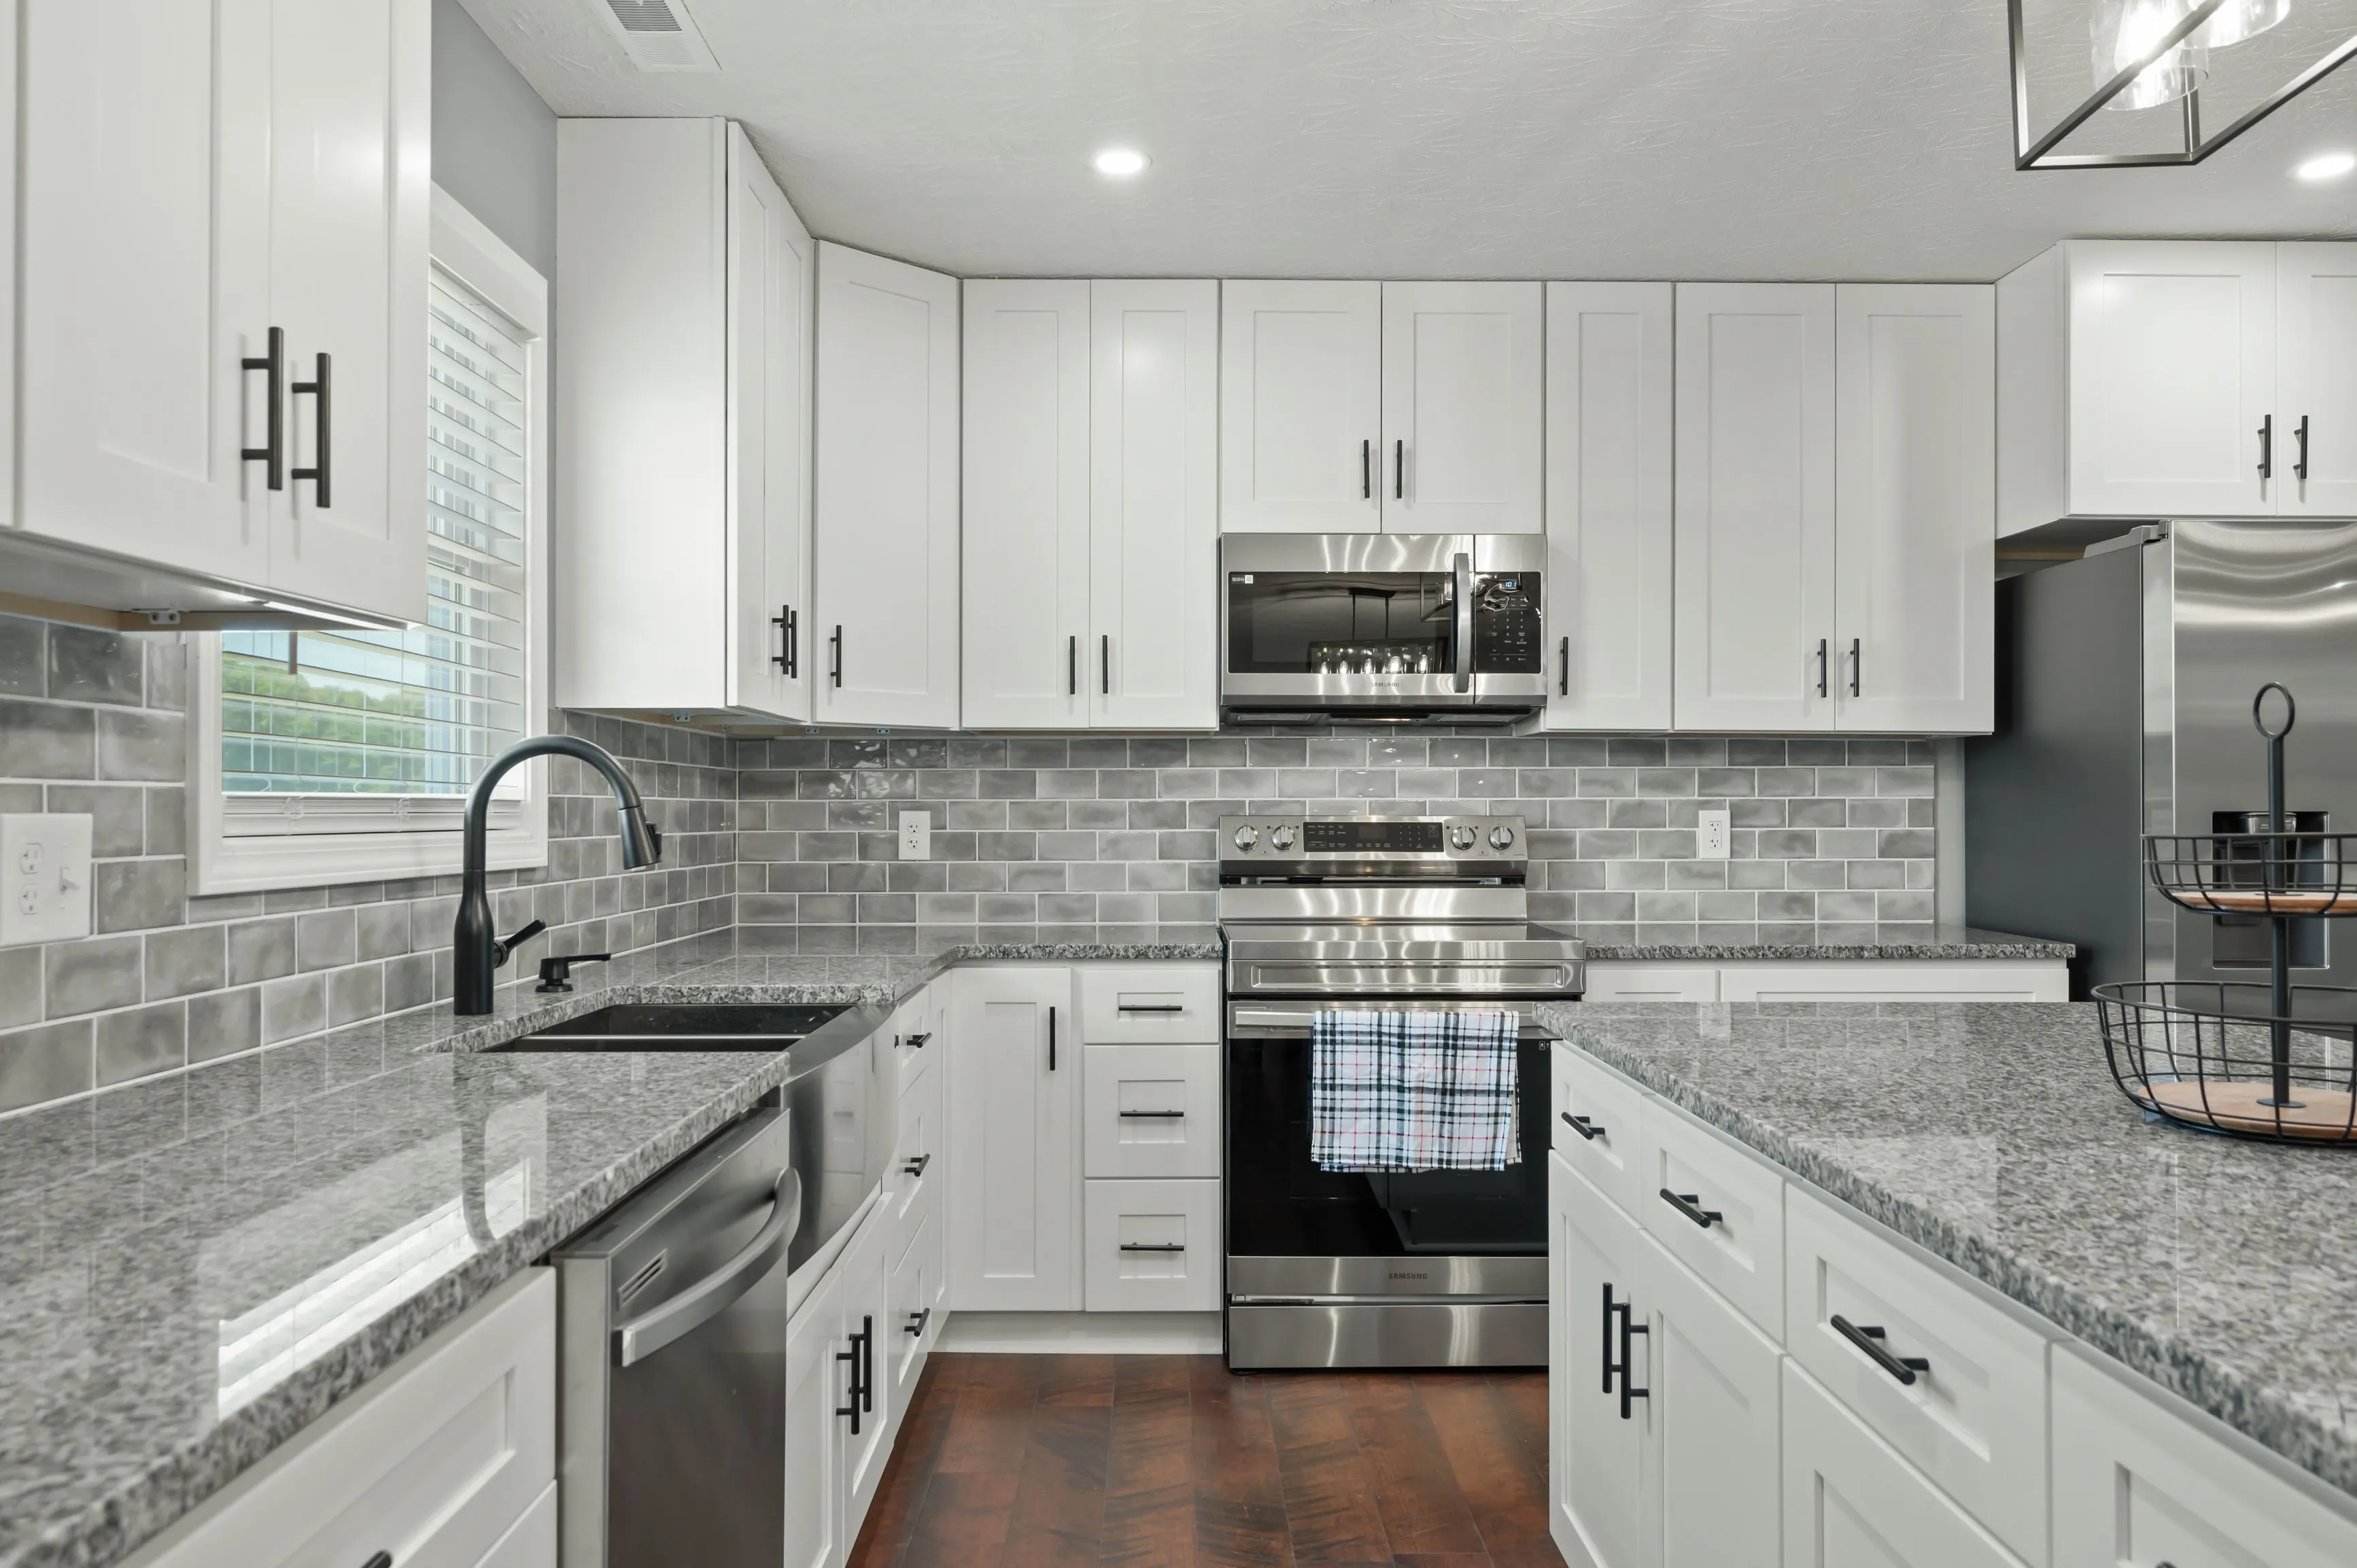 Modern kitchen interior with white cabinets, stainless steel appliances, and gray subway tile backsplash.